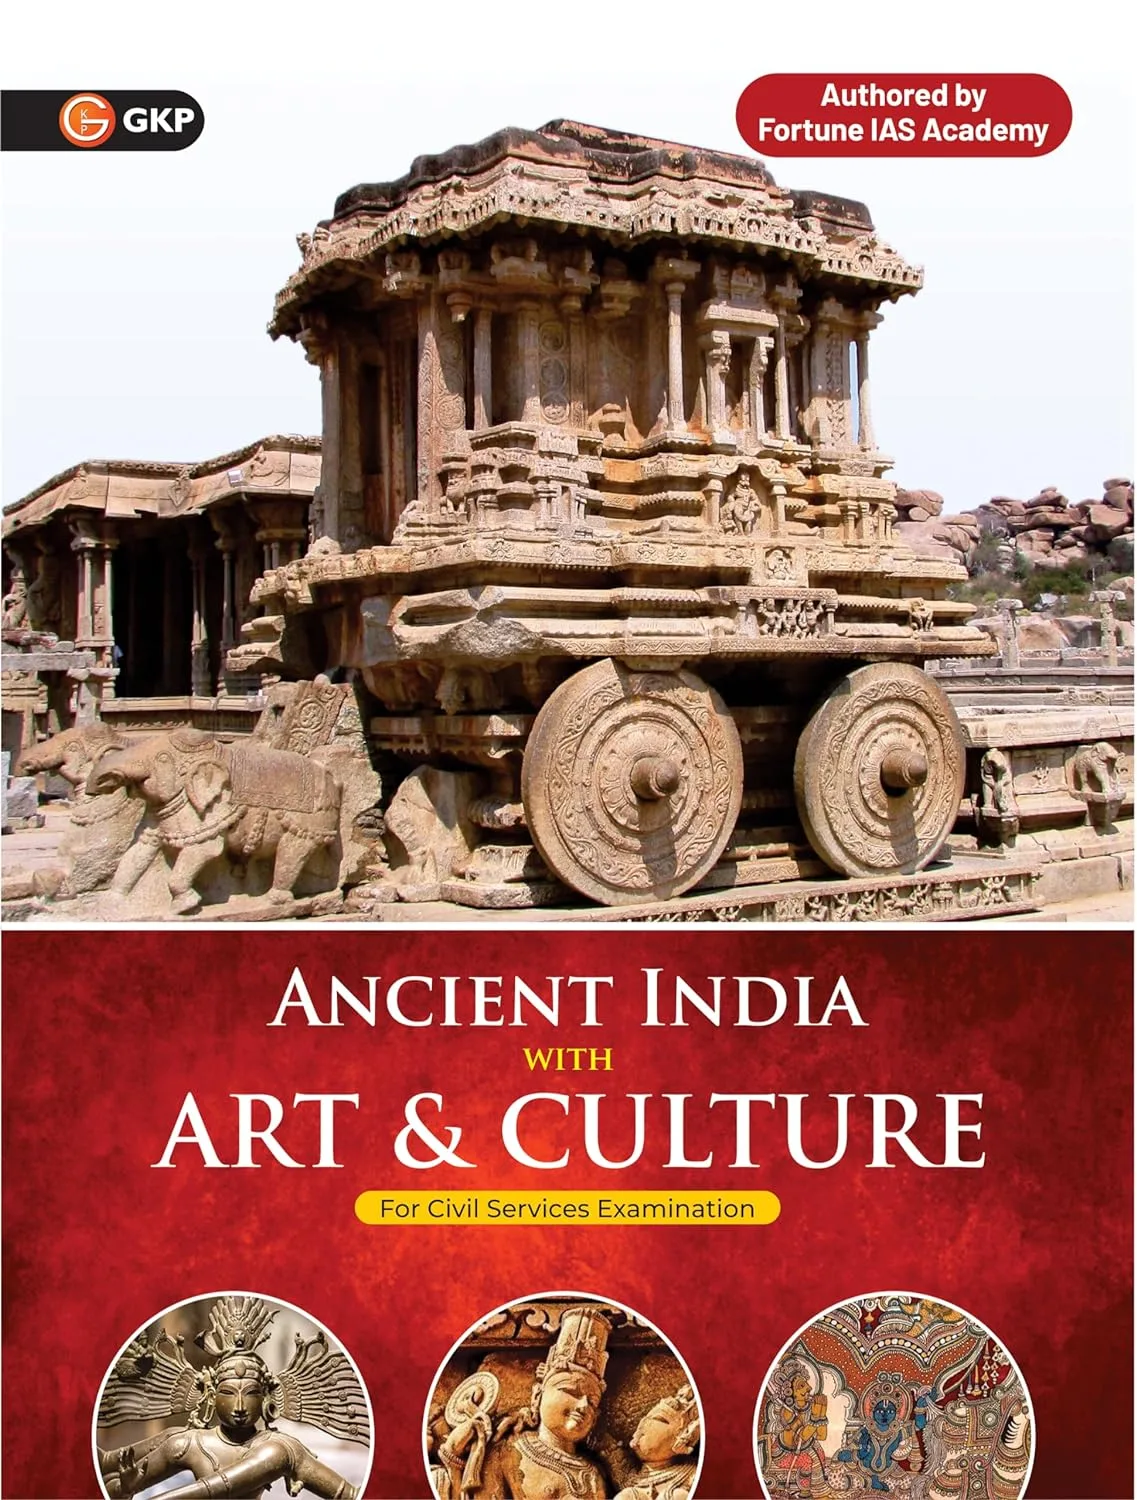 GKP Ancient India with Art & Culture For Civil Services Examinations